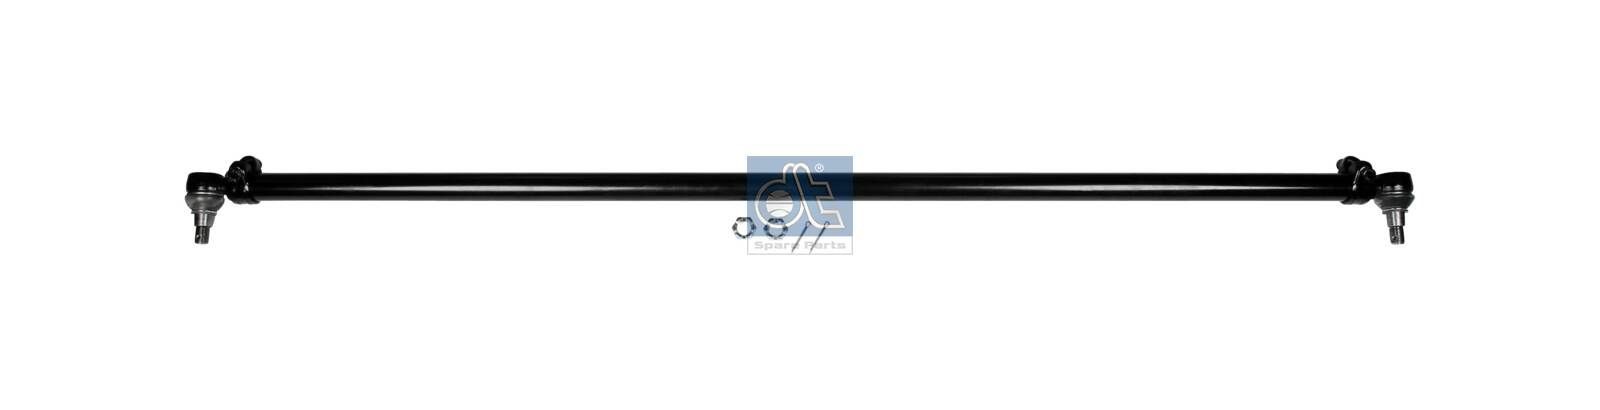 DT Spare Parts 5.22004 Rod Assembly 1270 853